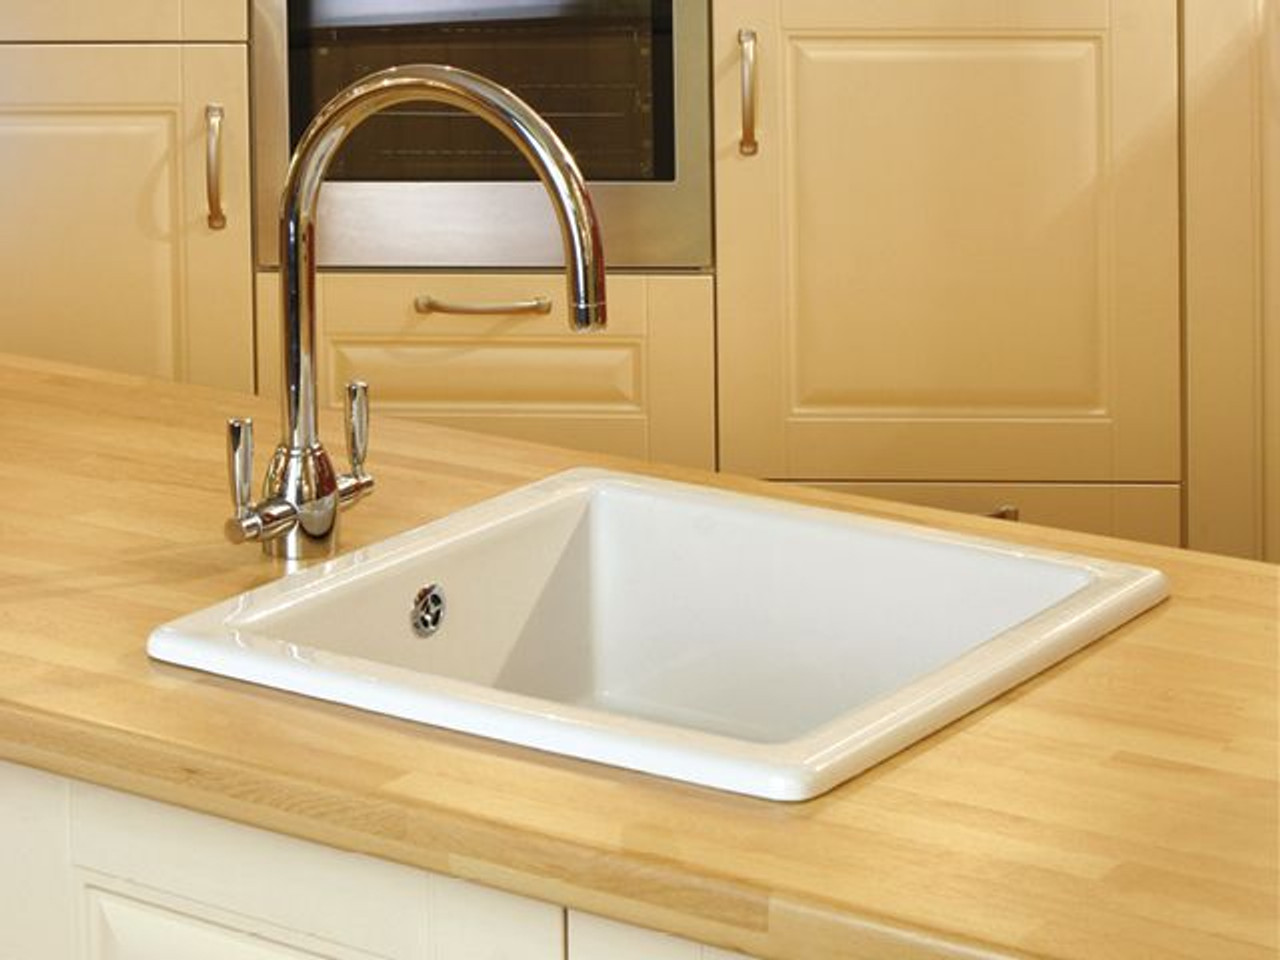 SCSQ460WH - Shaws Square 460 Classic Inset/Undermount Single Bowl Handcrafted Fireclay Sink